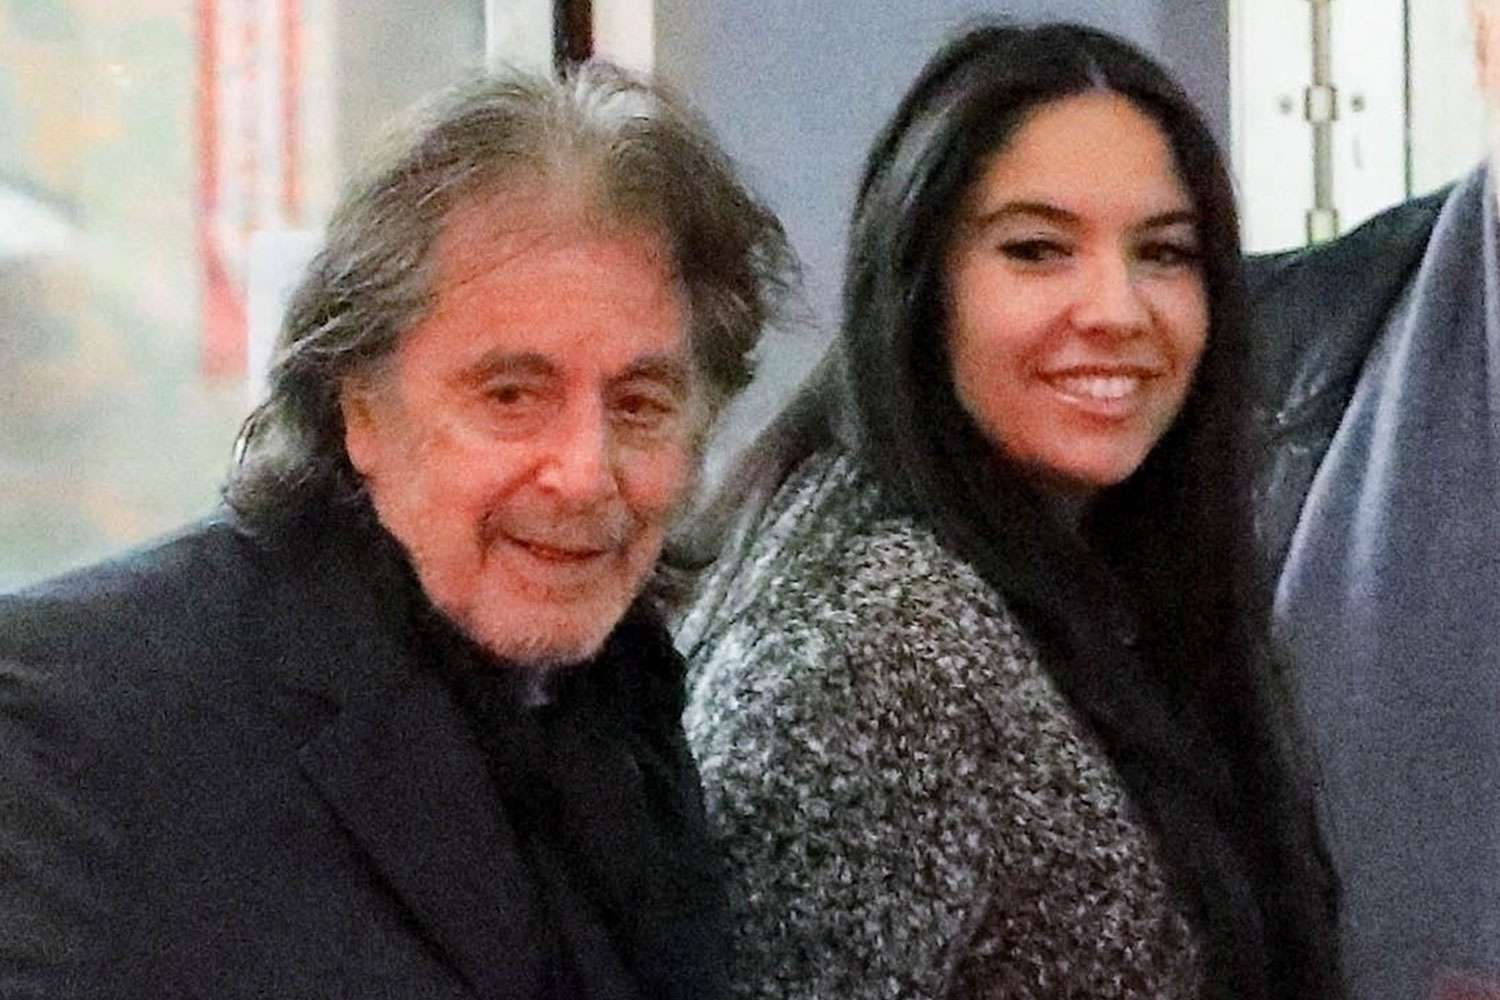 Al Pacino is expecting his first child with girlfriend